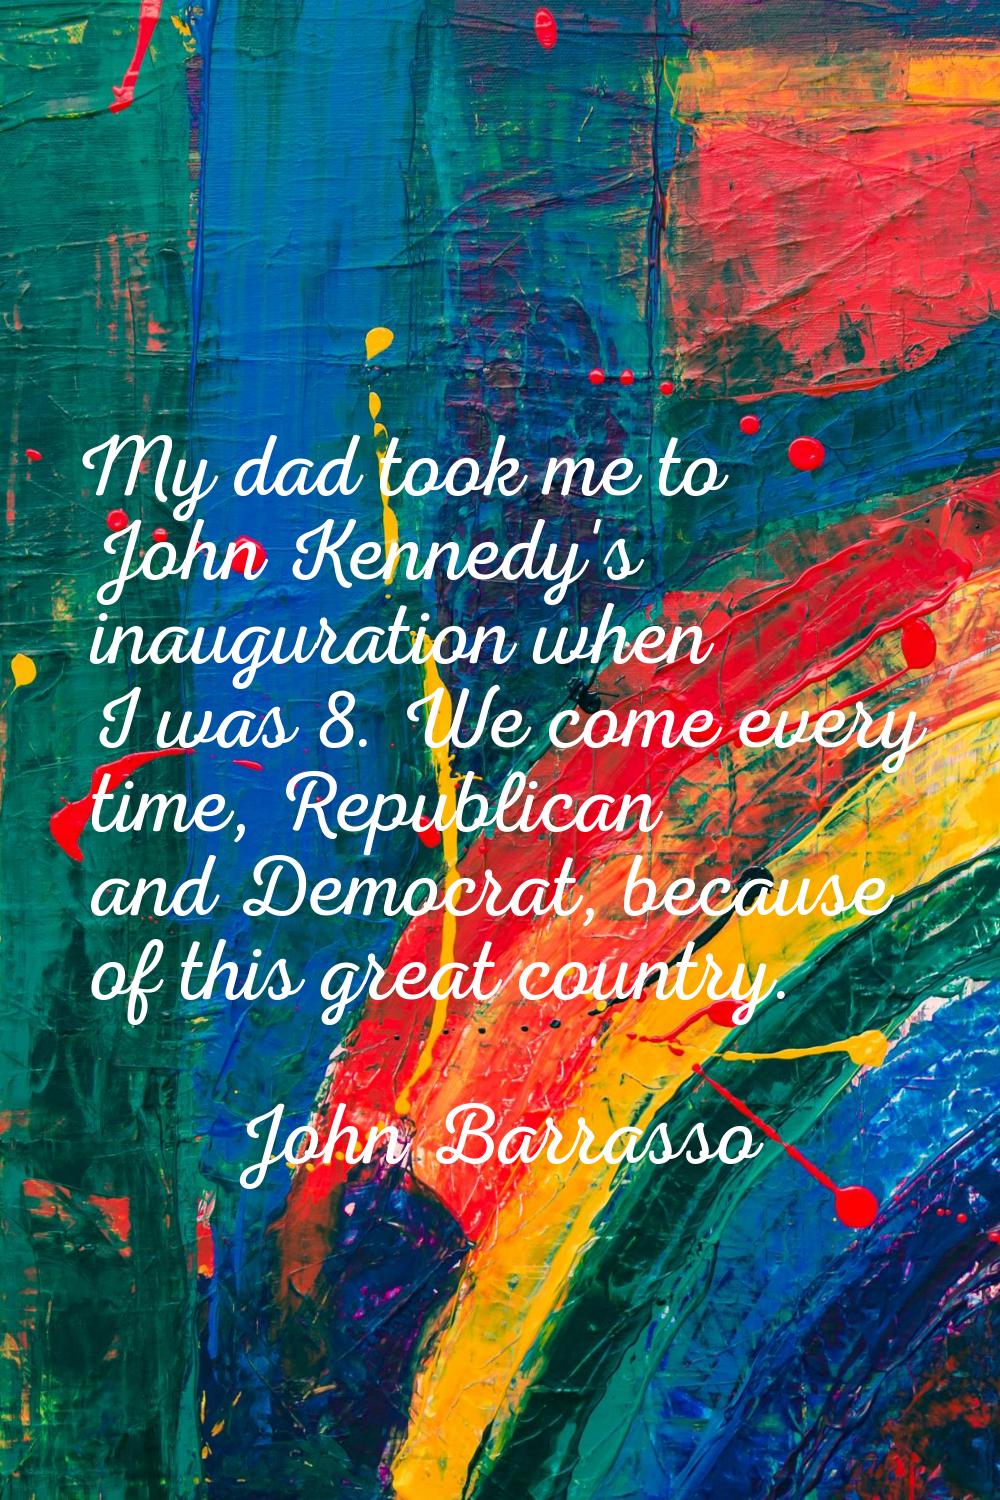 My dad took me to John Kennedy's inauguration when I was 8. We come every time, Republican and Demo